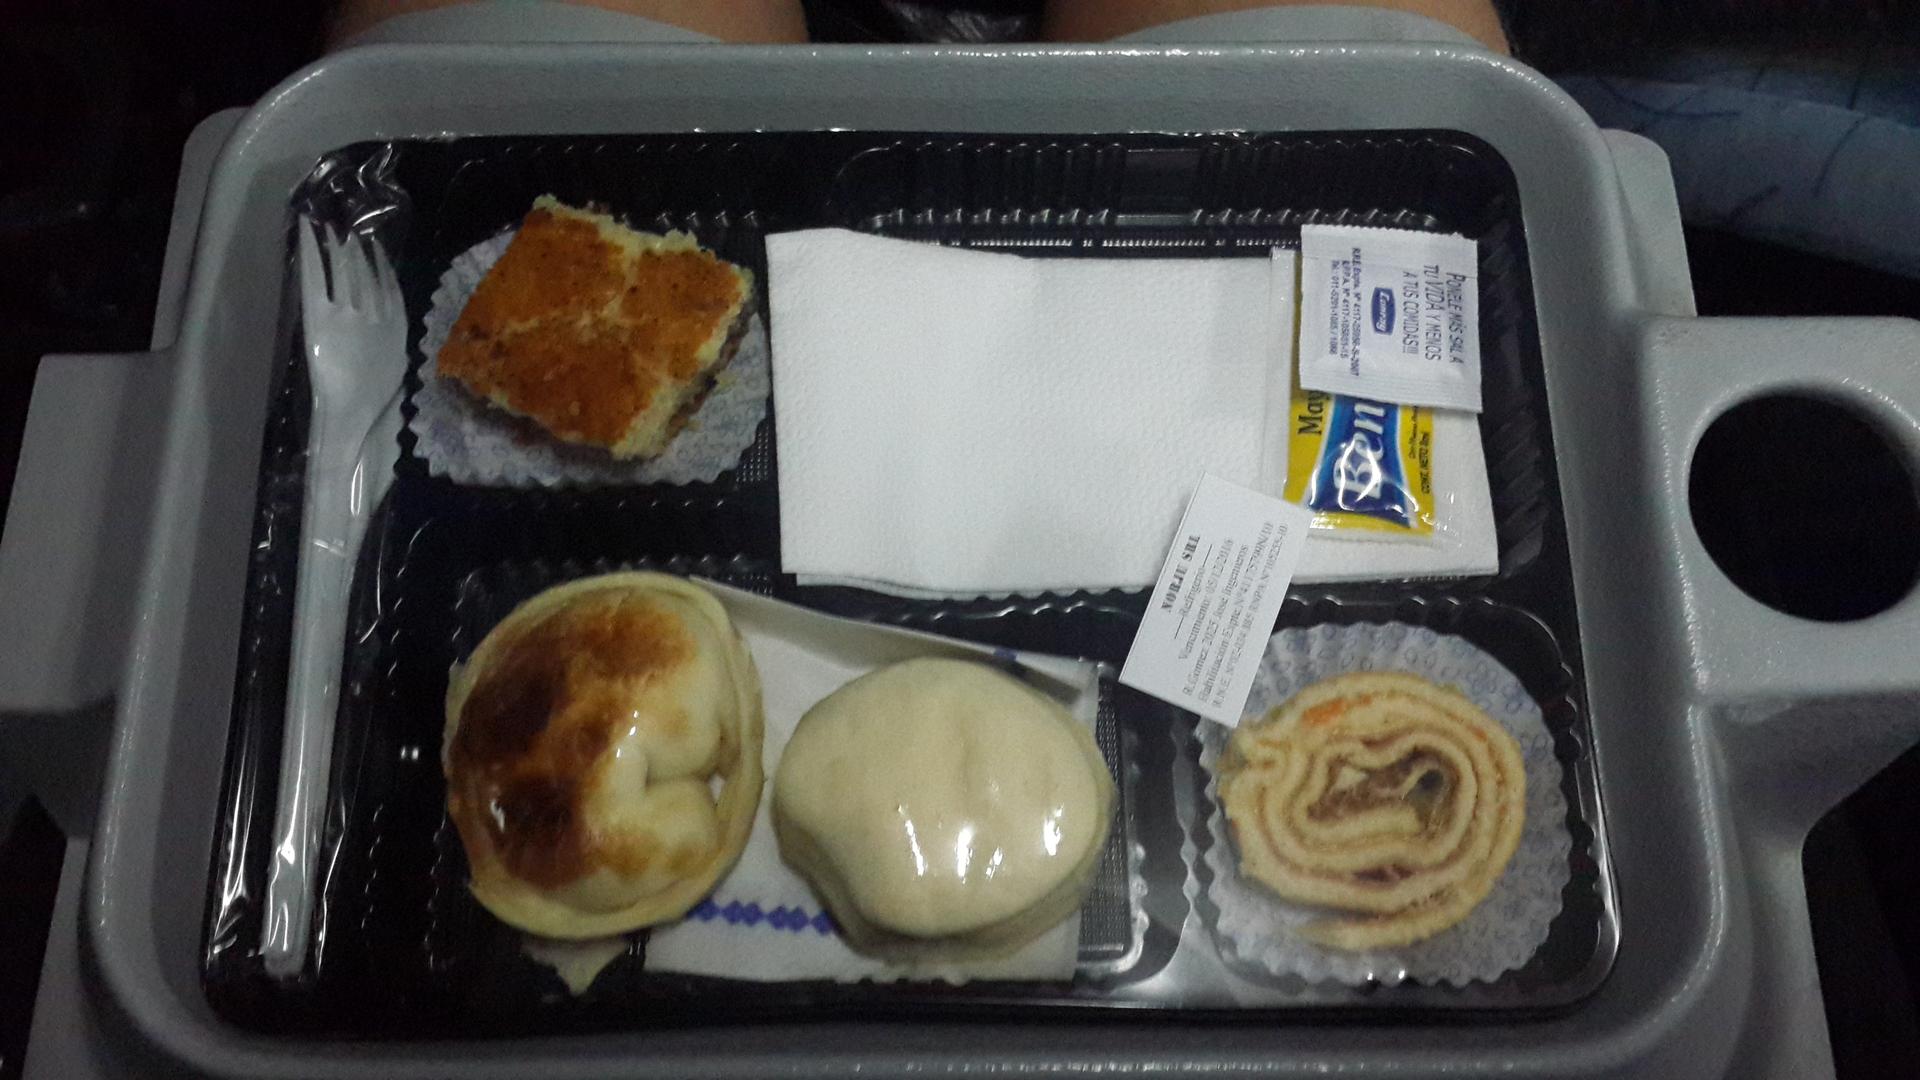 Bus food from Buenos Aires to Bariloche. In Argentina every food was heavily sweatened with sugar. The dinner serverd in the bus was buns and cakes.